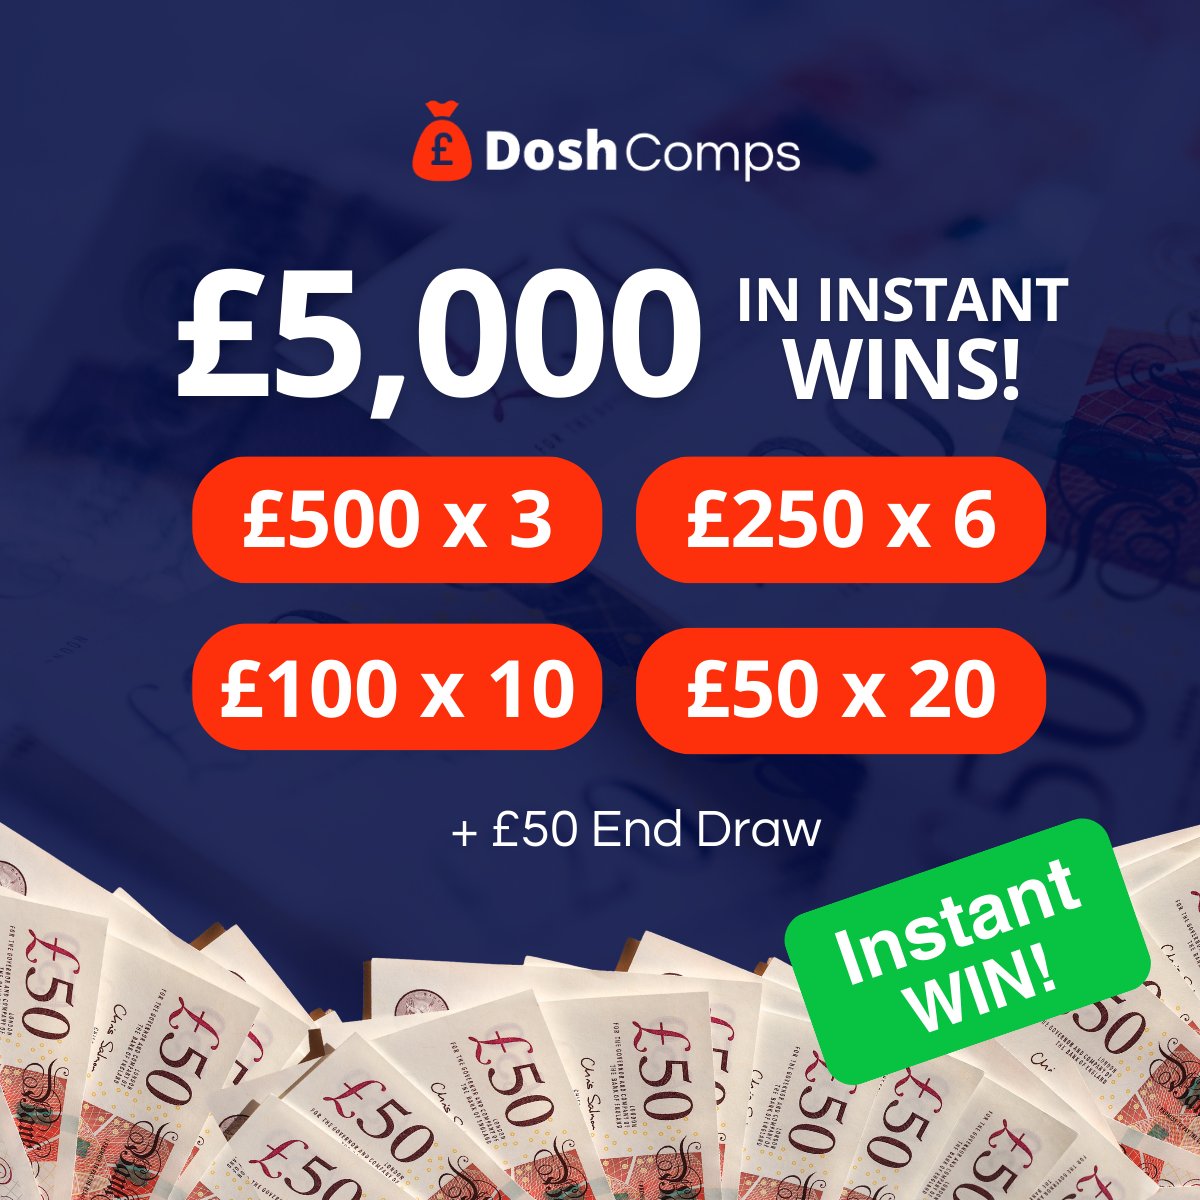 Loads of new competitions up on the website! 😀
£1,000s in Instant Wins so get in early. 👍
Tickets at 👉 doshcomps.co.uk
Good Luck everybody! 🍀
#prizes #prizesuk #prizedraw #prizewinner #prizegiveway #winners #competitionuk #prizesuk #win #doshcomps